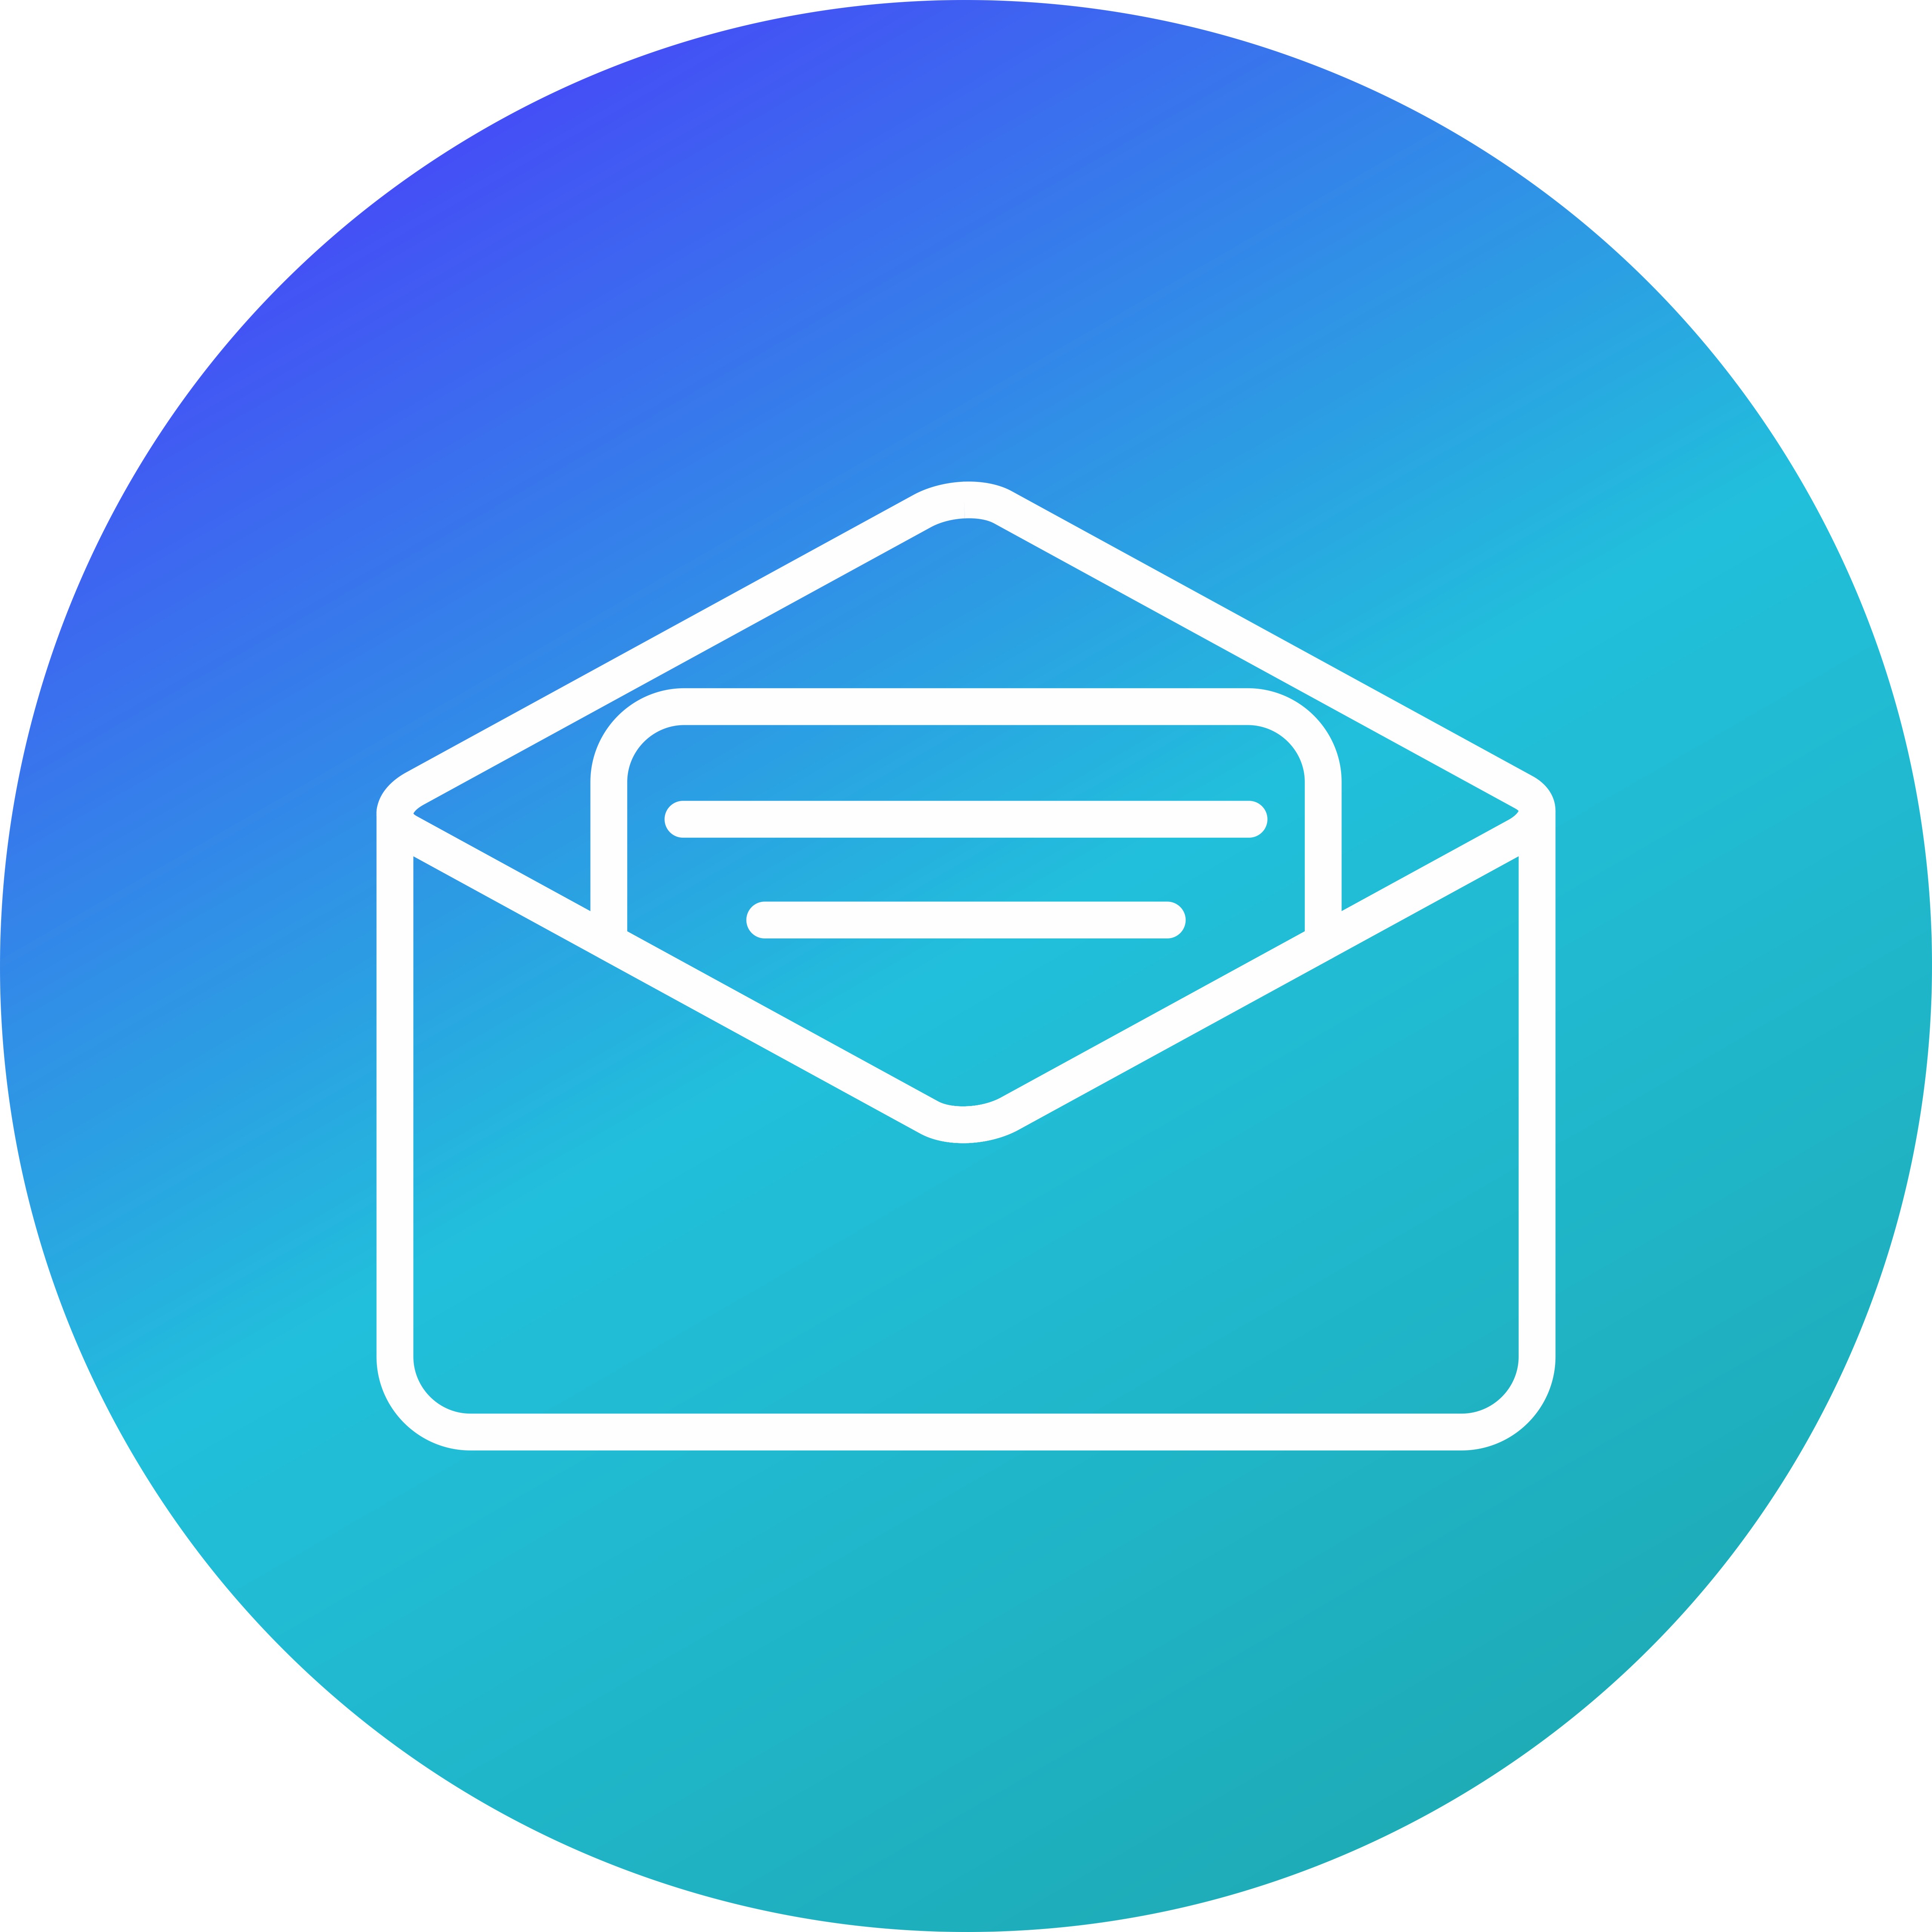 Download Vector Email Icon - Download Free Vectors, Clipart ...